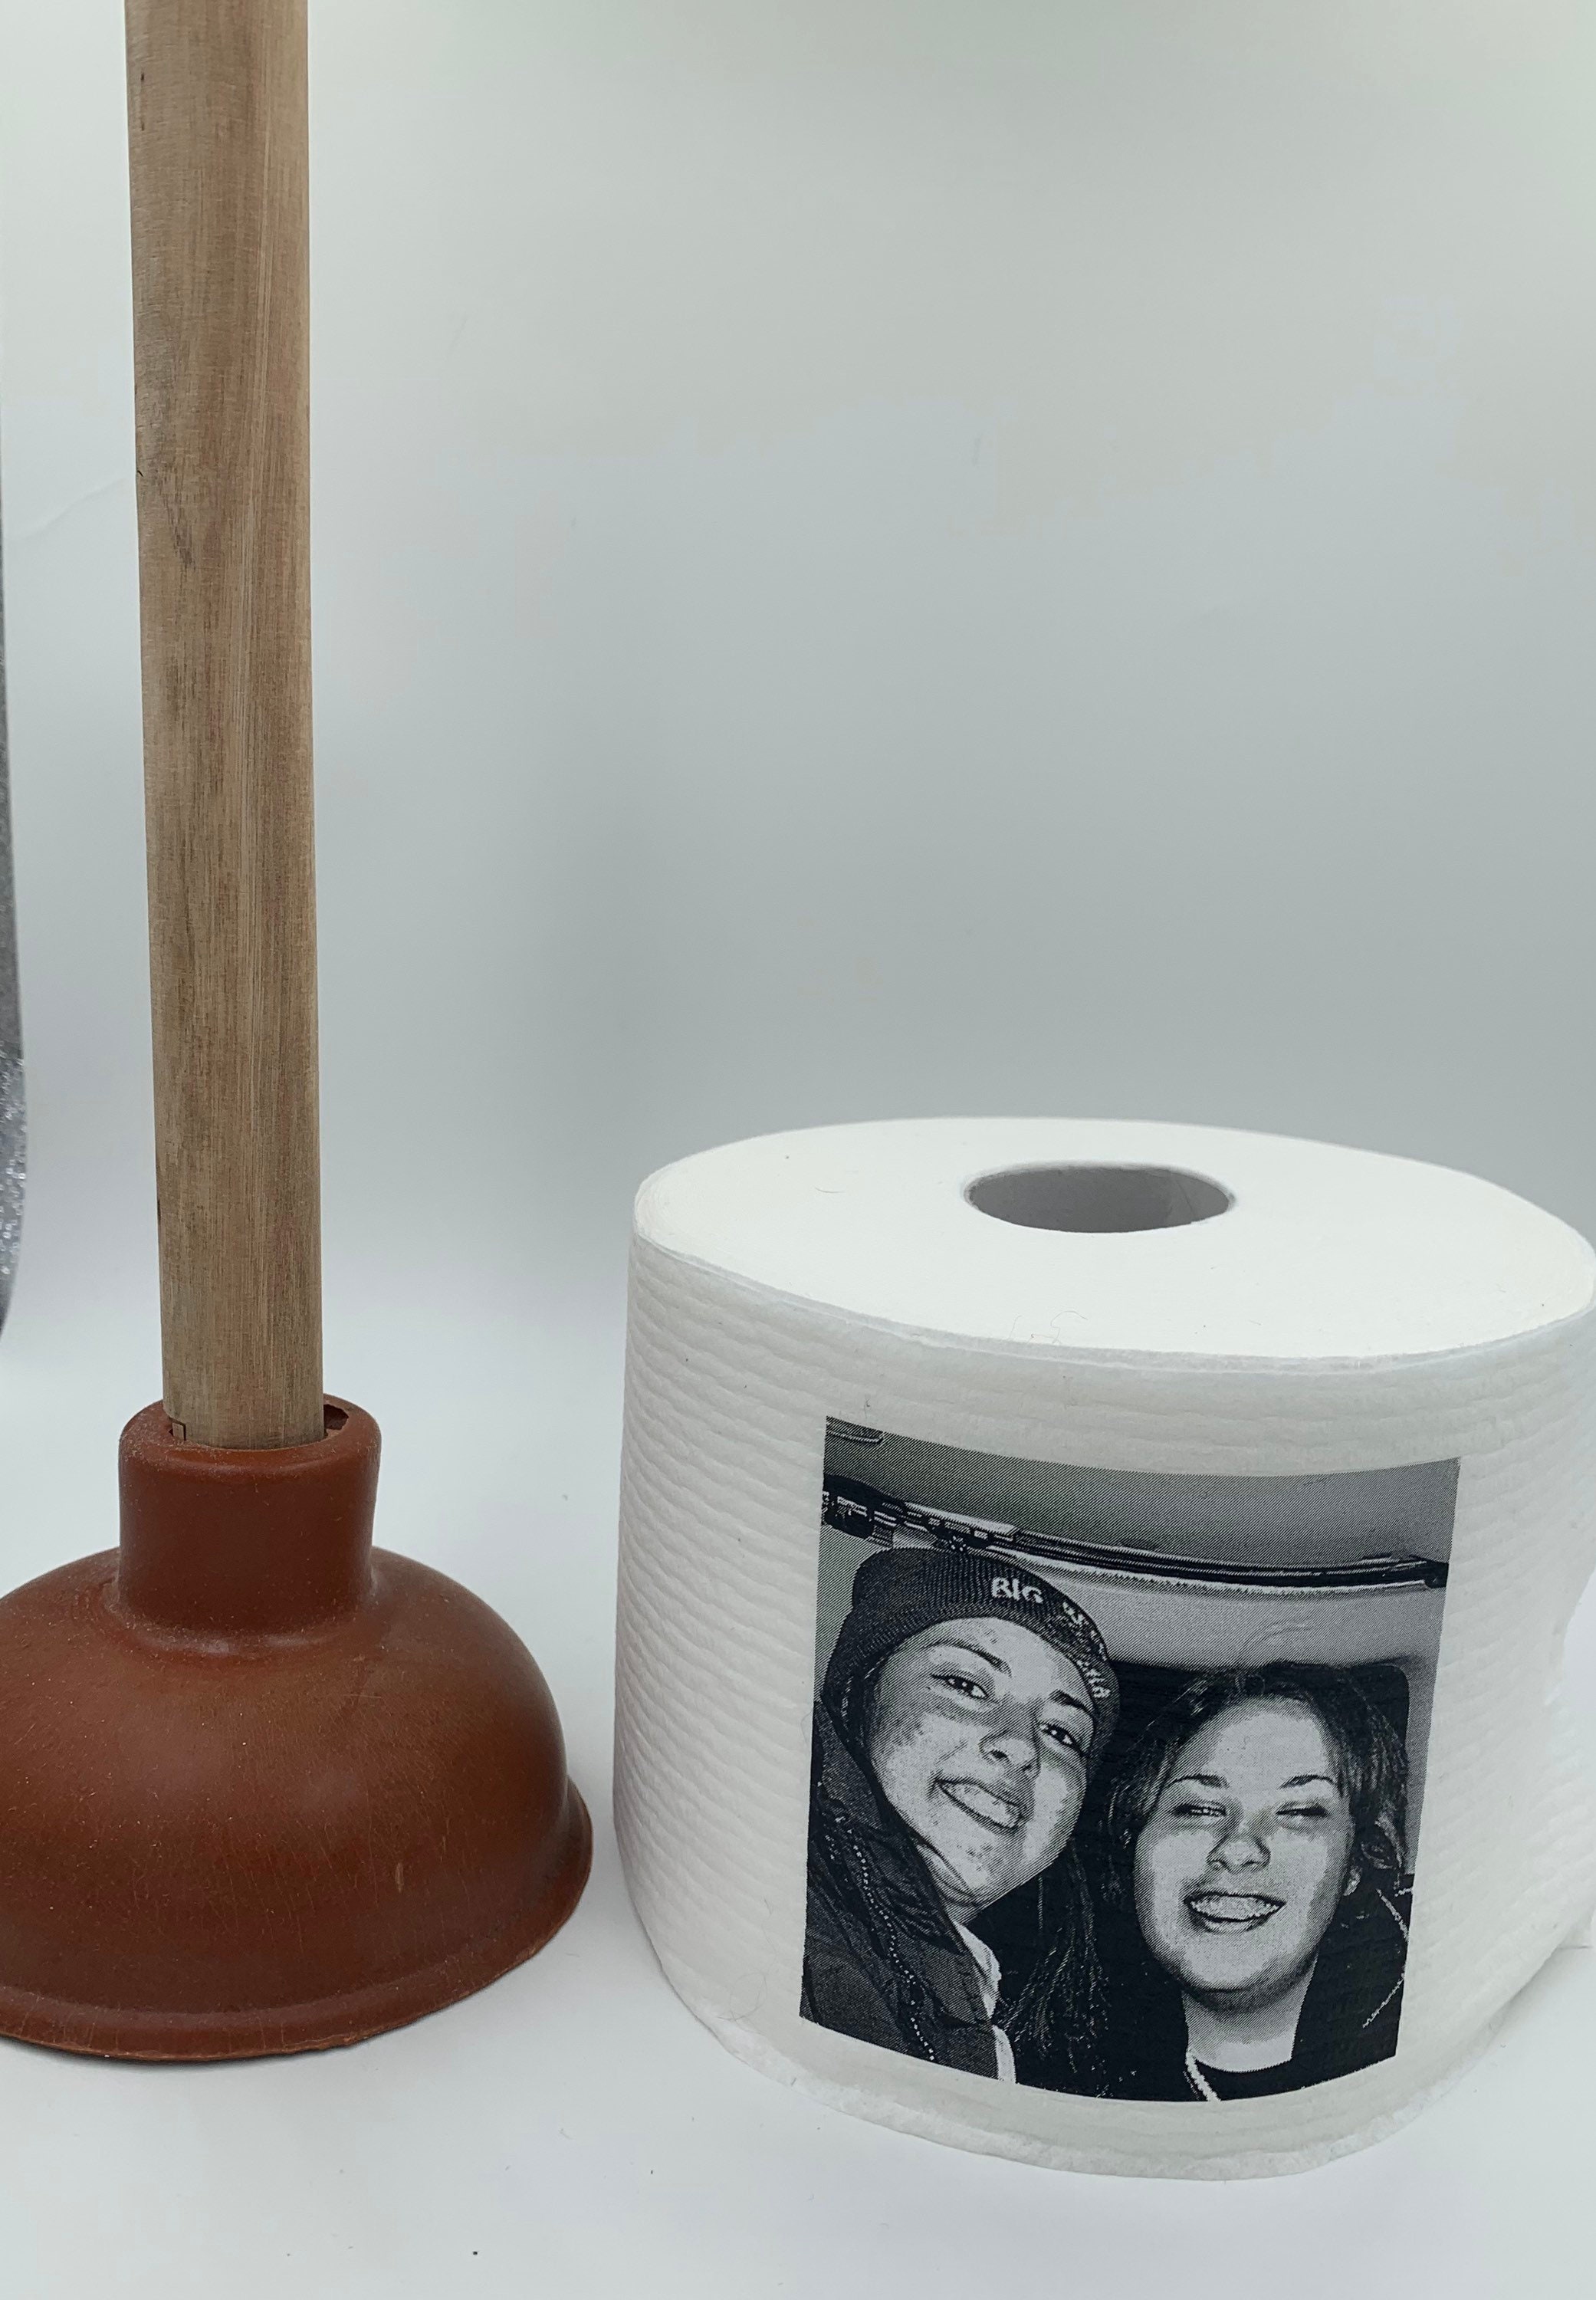 Printed TP Customized Printed Toilet Paper Gift Set, Personalized Desi –